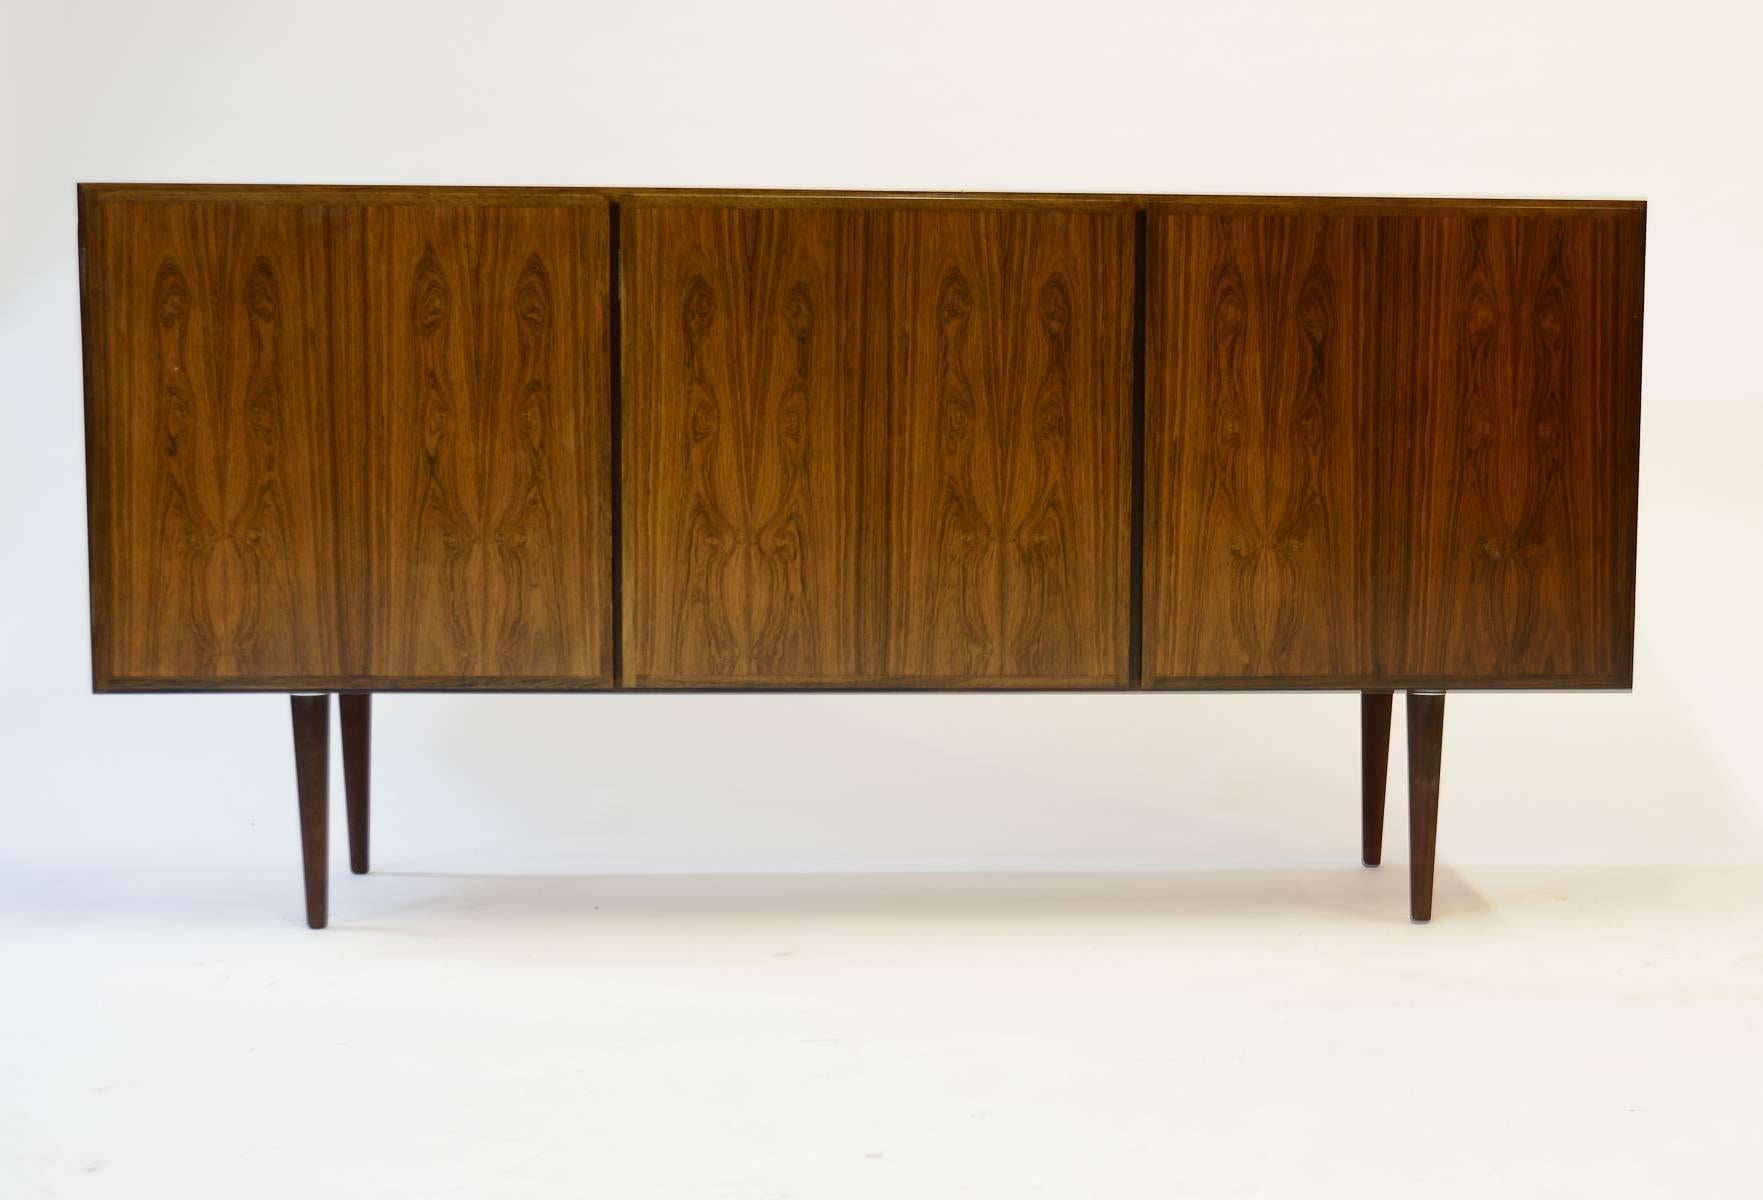 A finely-grained rosewood Model 30 credenza by Danish Mid-Century designer Gunni Omann for Omann Jun.

Upper drawer and adjustable shelf in the left compartment. Double adjustable shelves in the centre and right compartments.